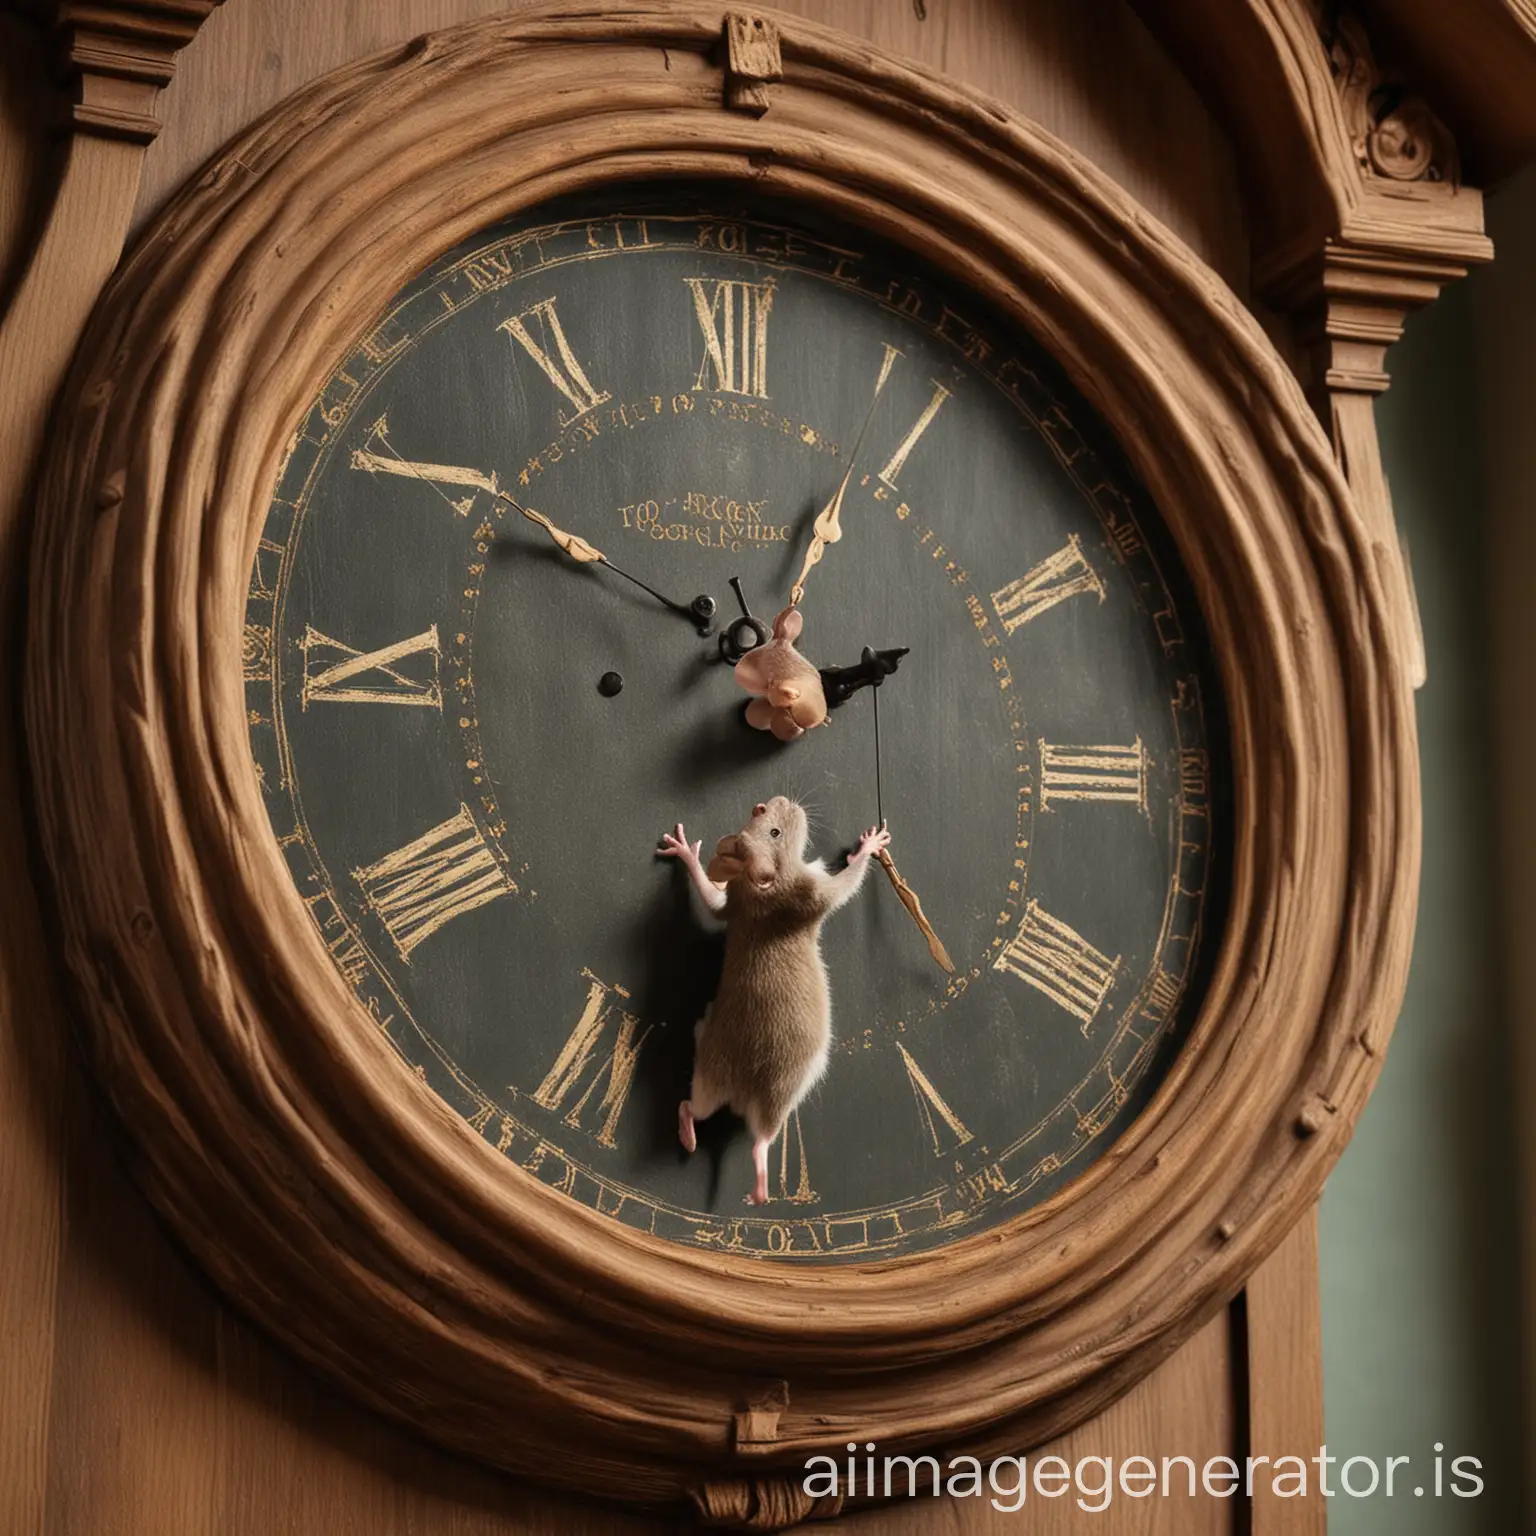 Graceful-Mouse-on-Grand-Clock-Ticking-Time